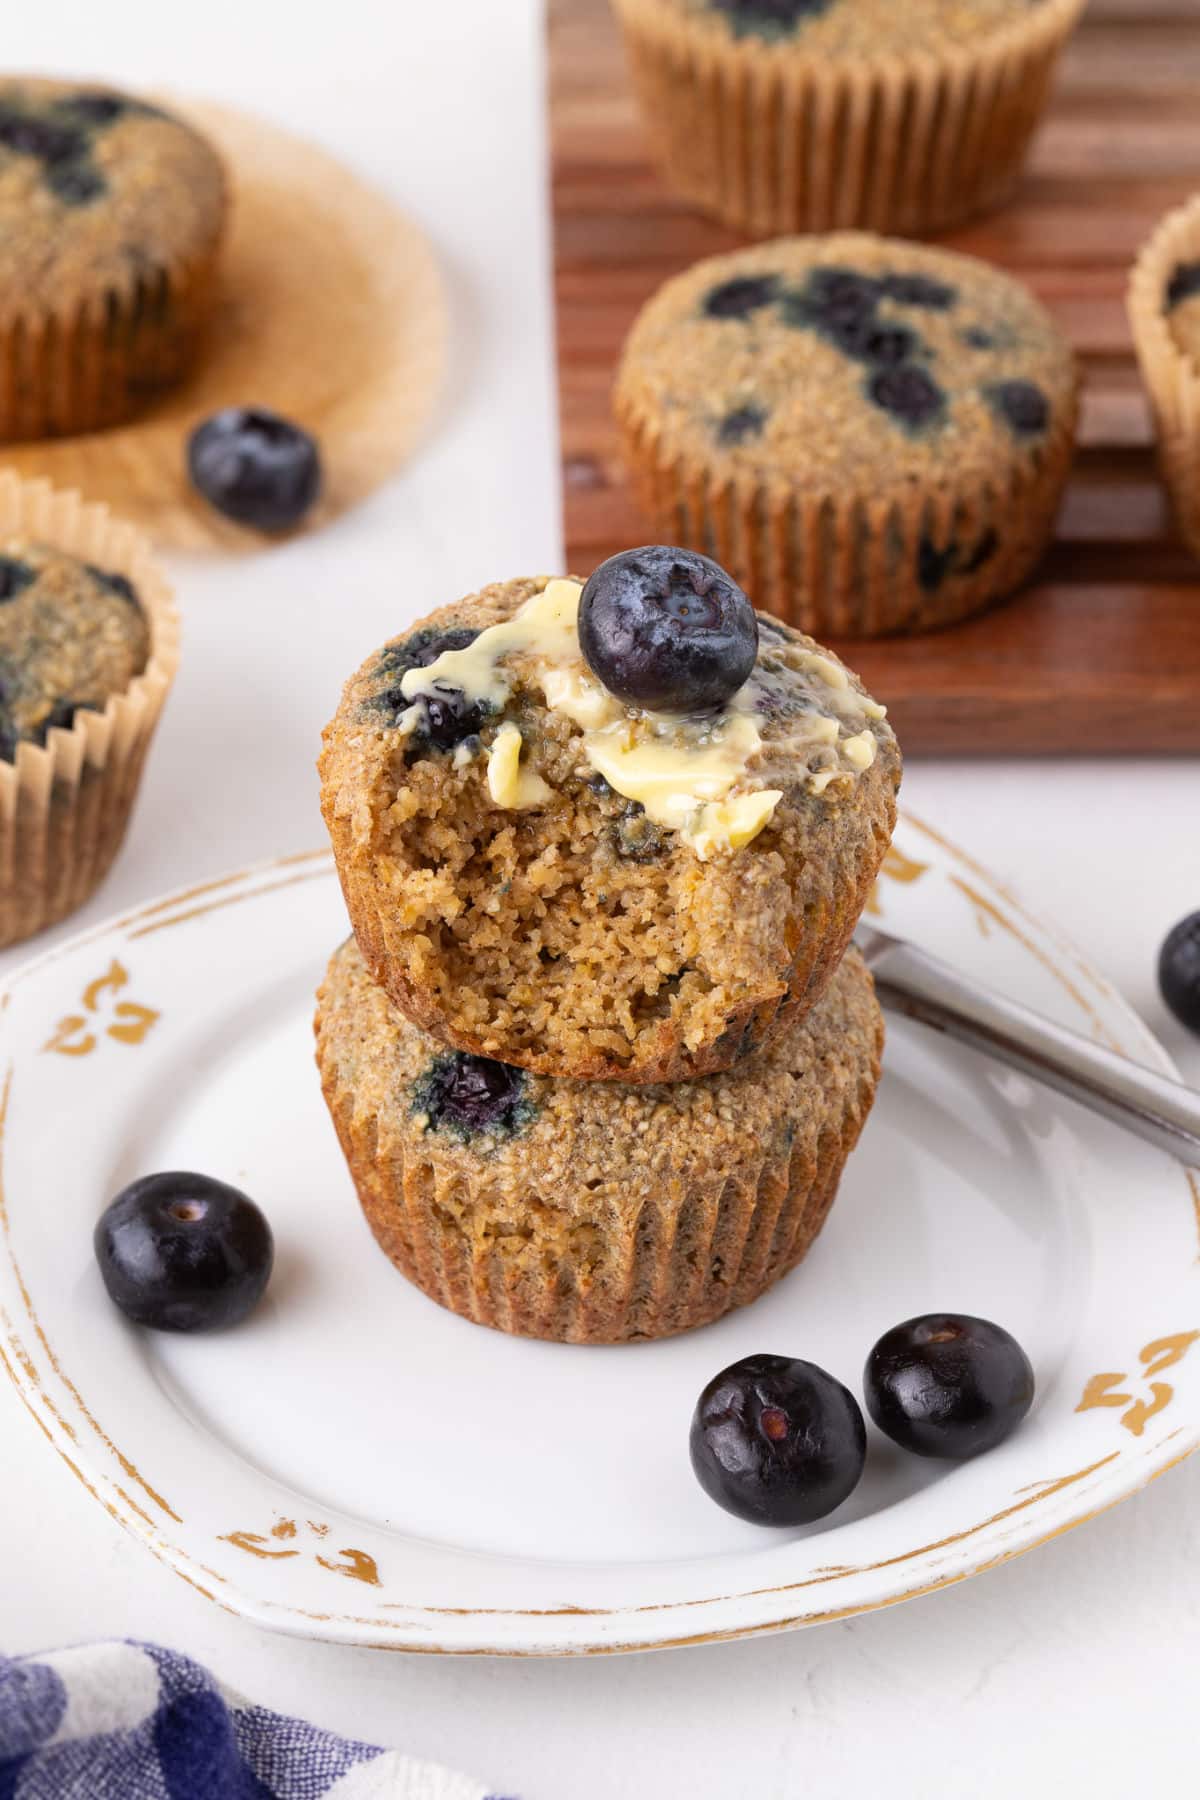 Stack of two blueberry oat bran muffins.